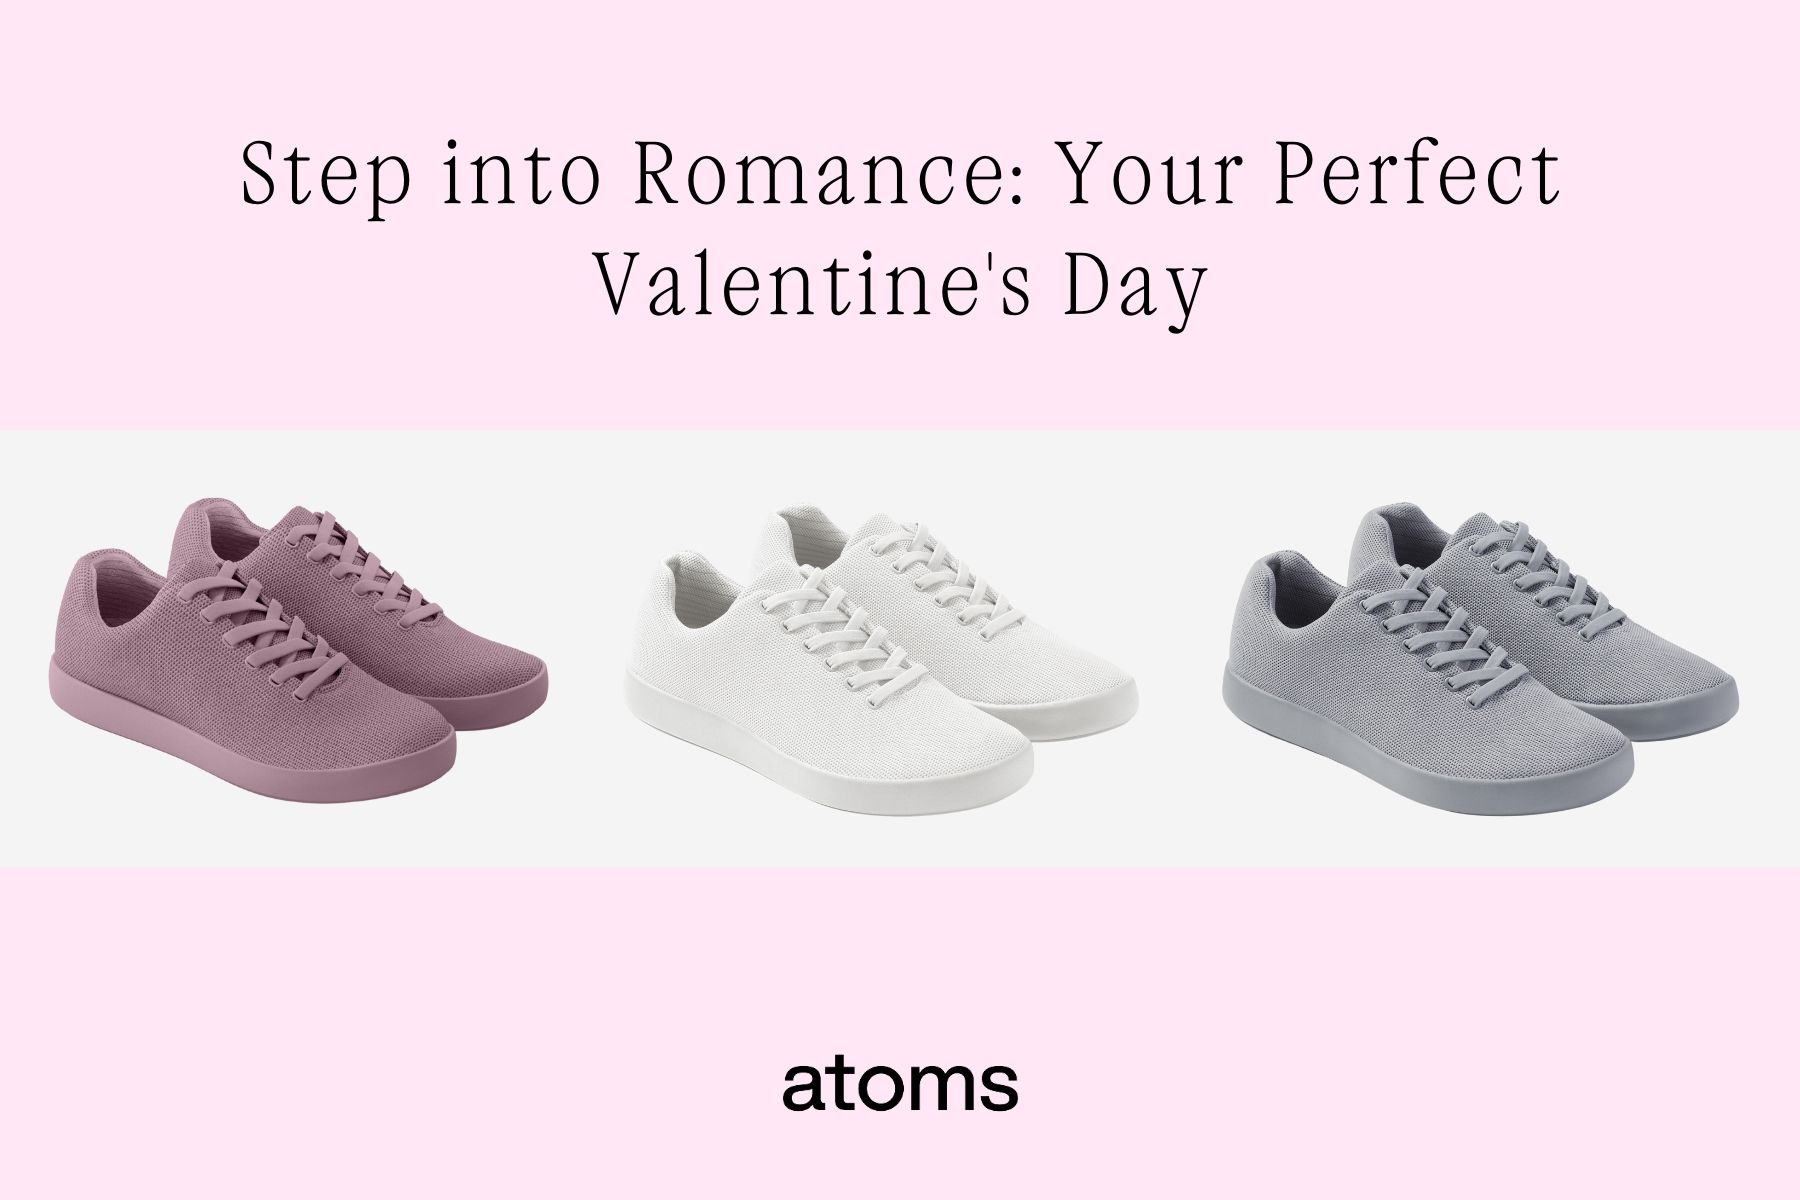 Step into Romance: Your Perfect Valentine's Day Ideas